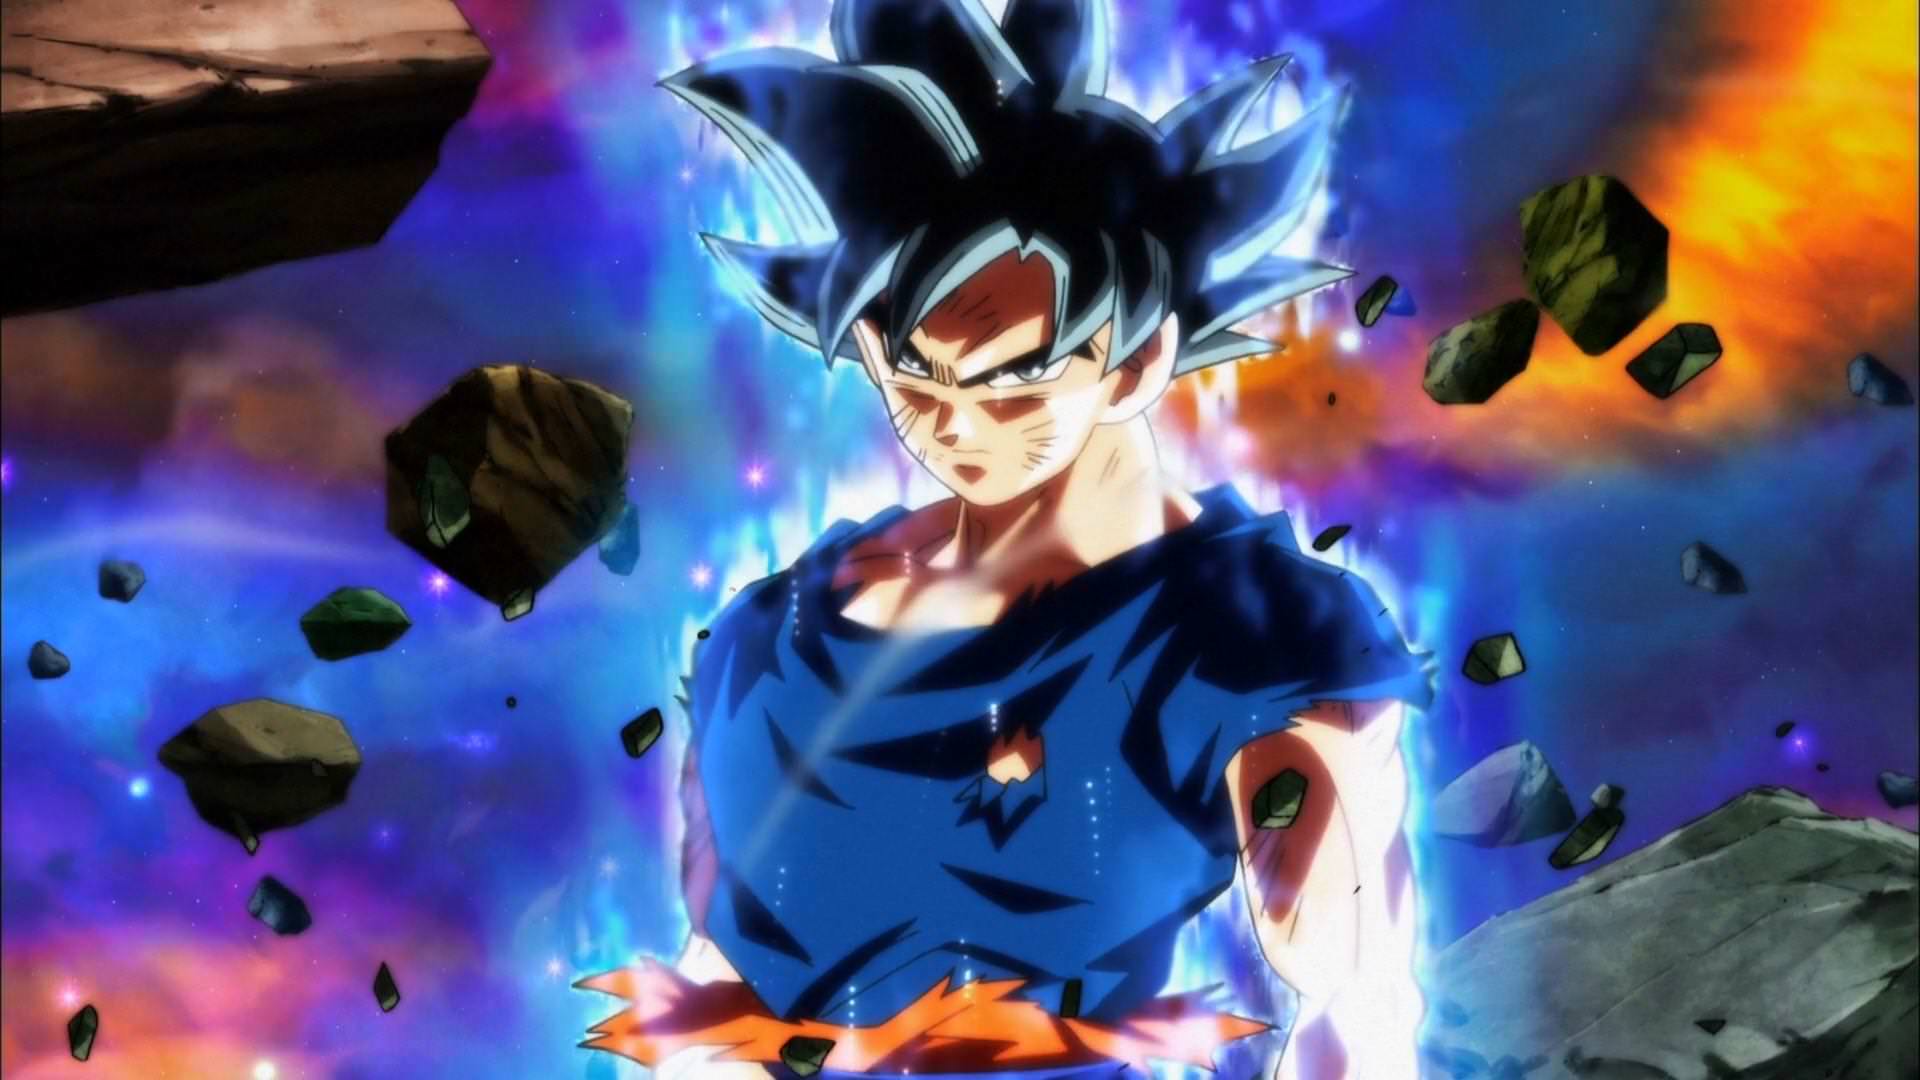 Made a wallpaper of Ultra Instinct Goku for y'all 1920x1080